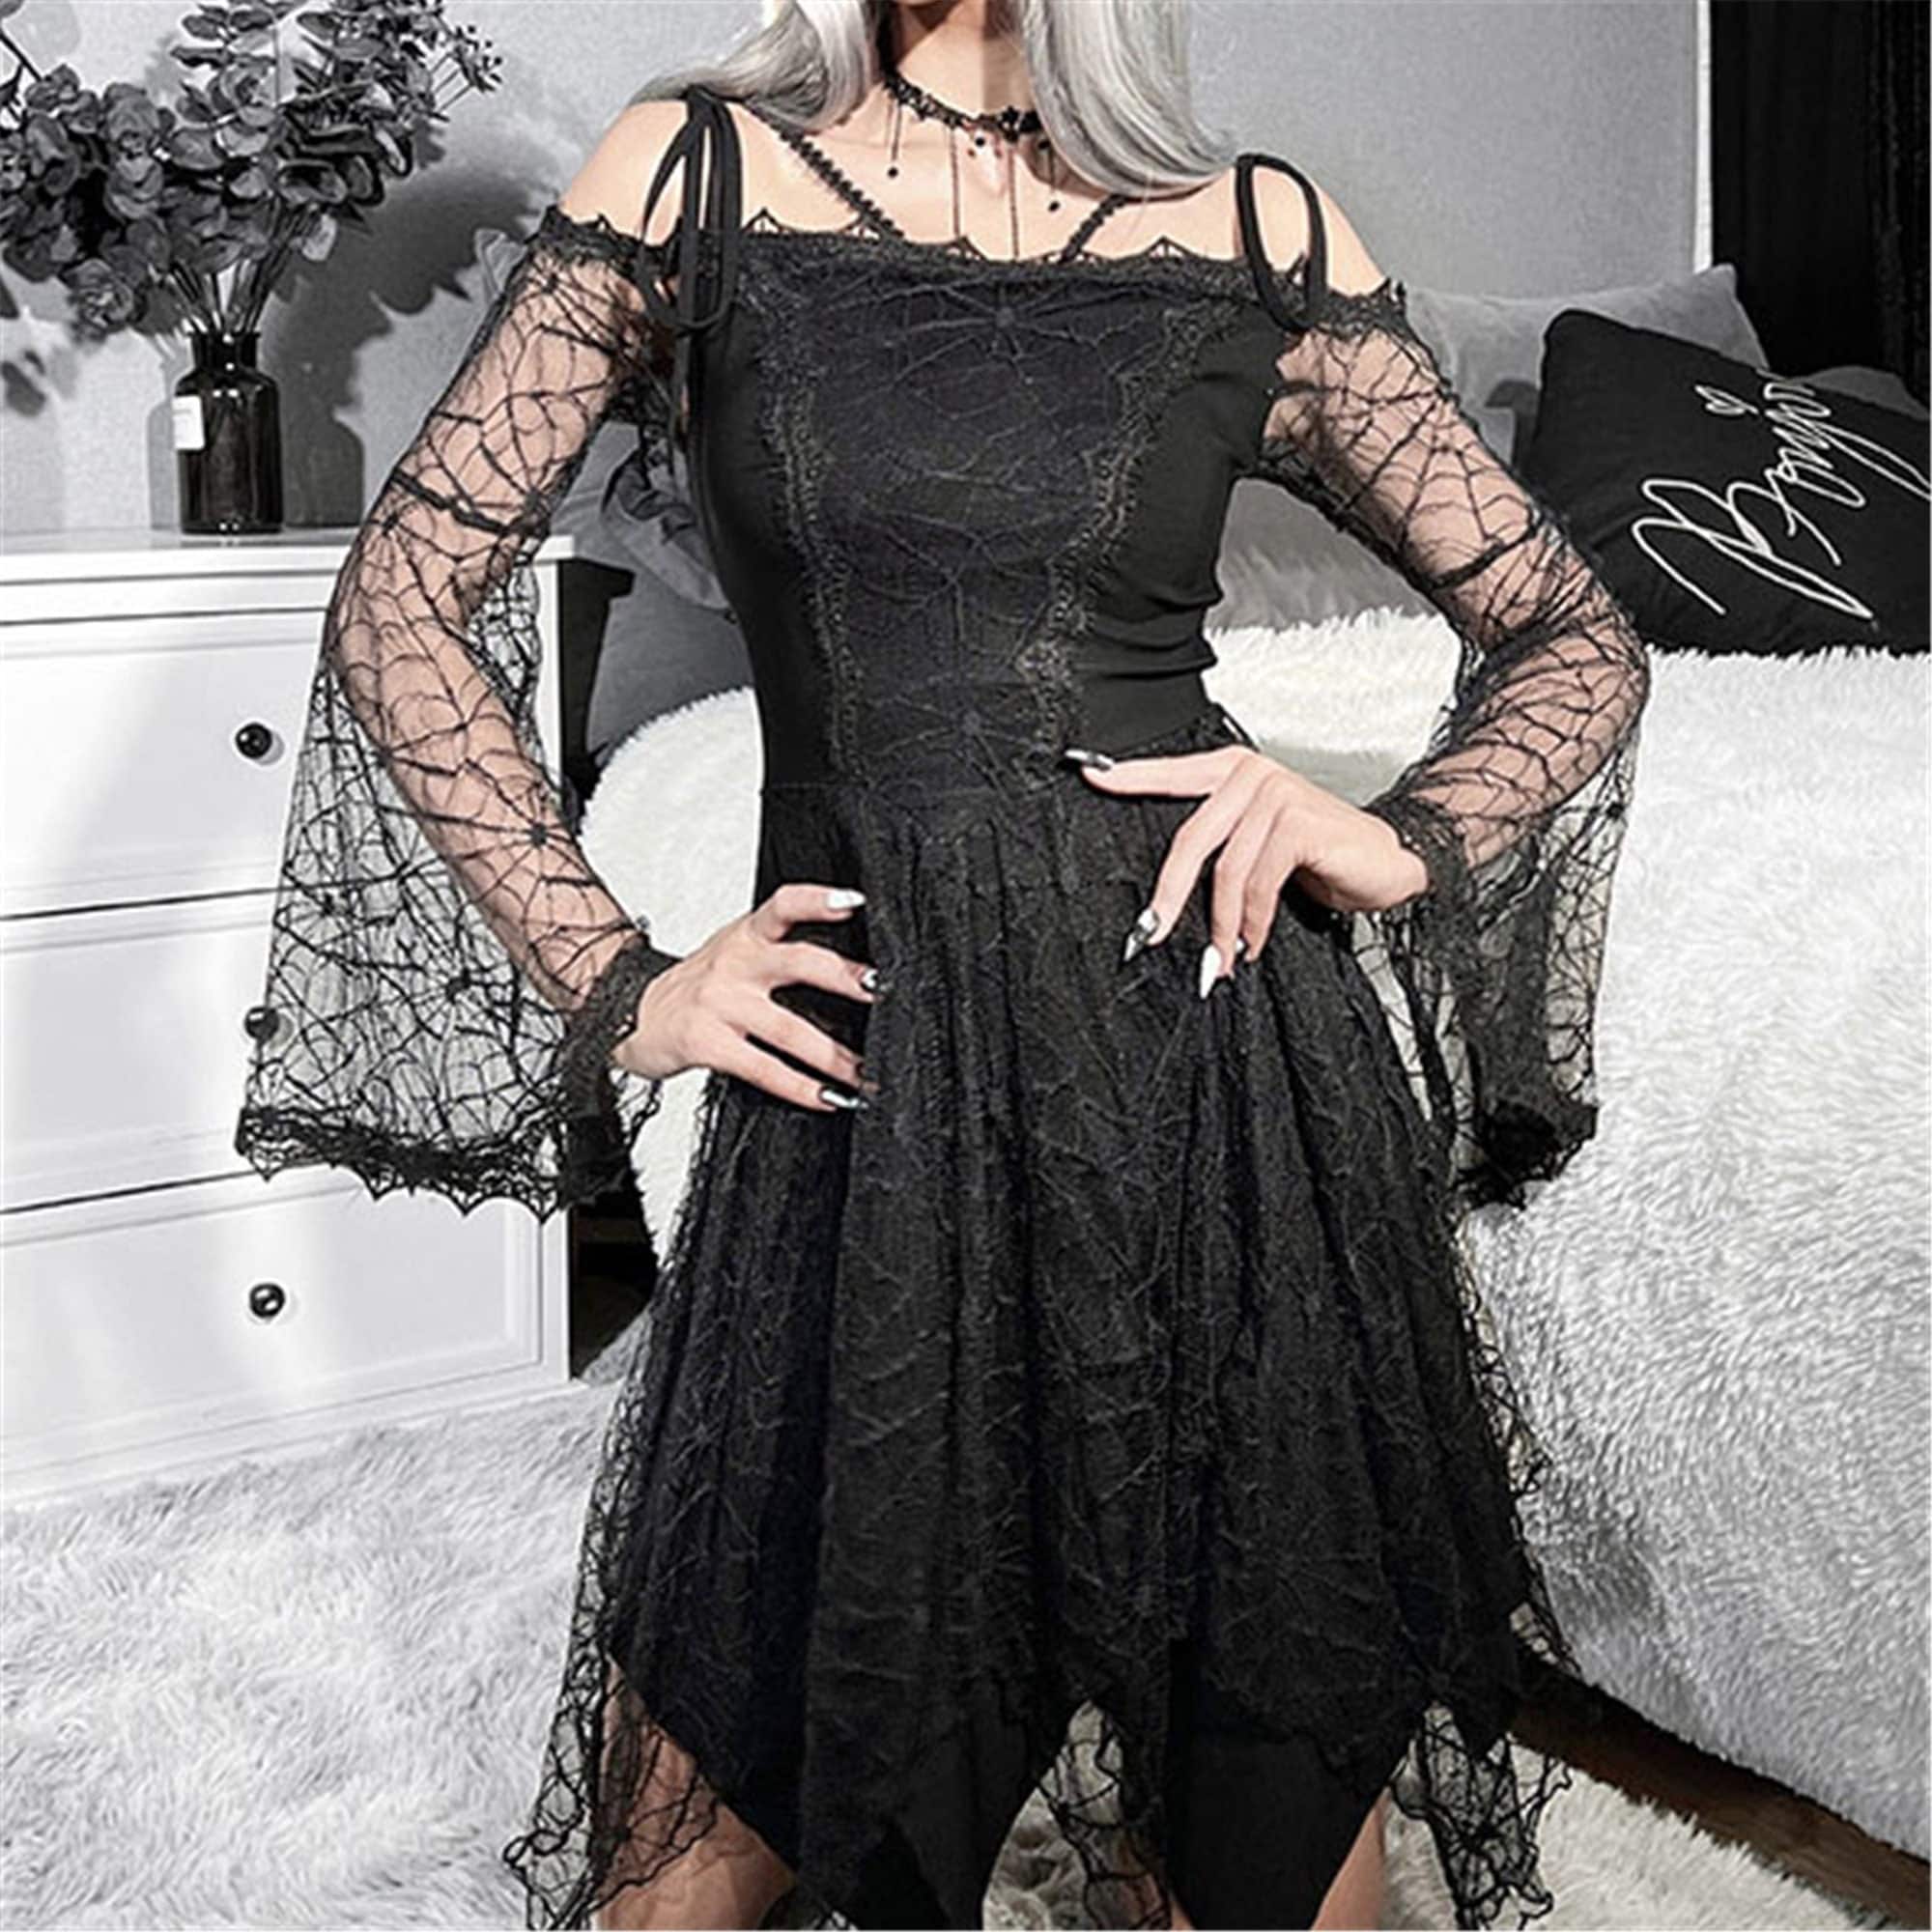 Spider Web Lace Skinny Goth High Waist Dress Gothic Lace Ruffled Long Sleeve Dress Lace Perspective Stitching Dress French Vintage Dress